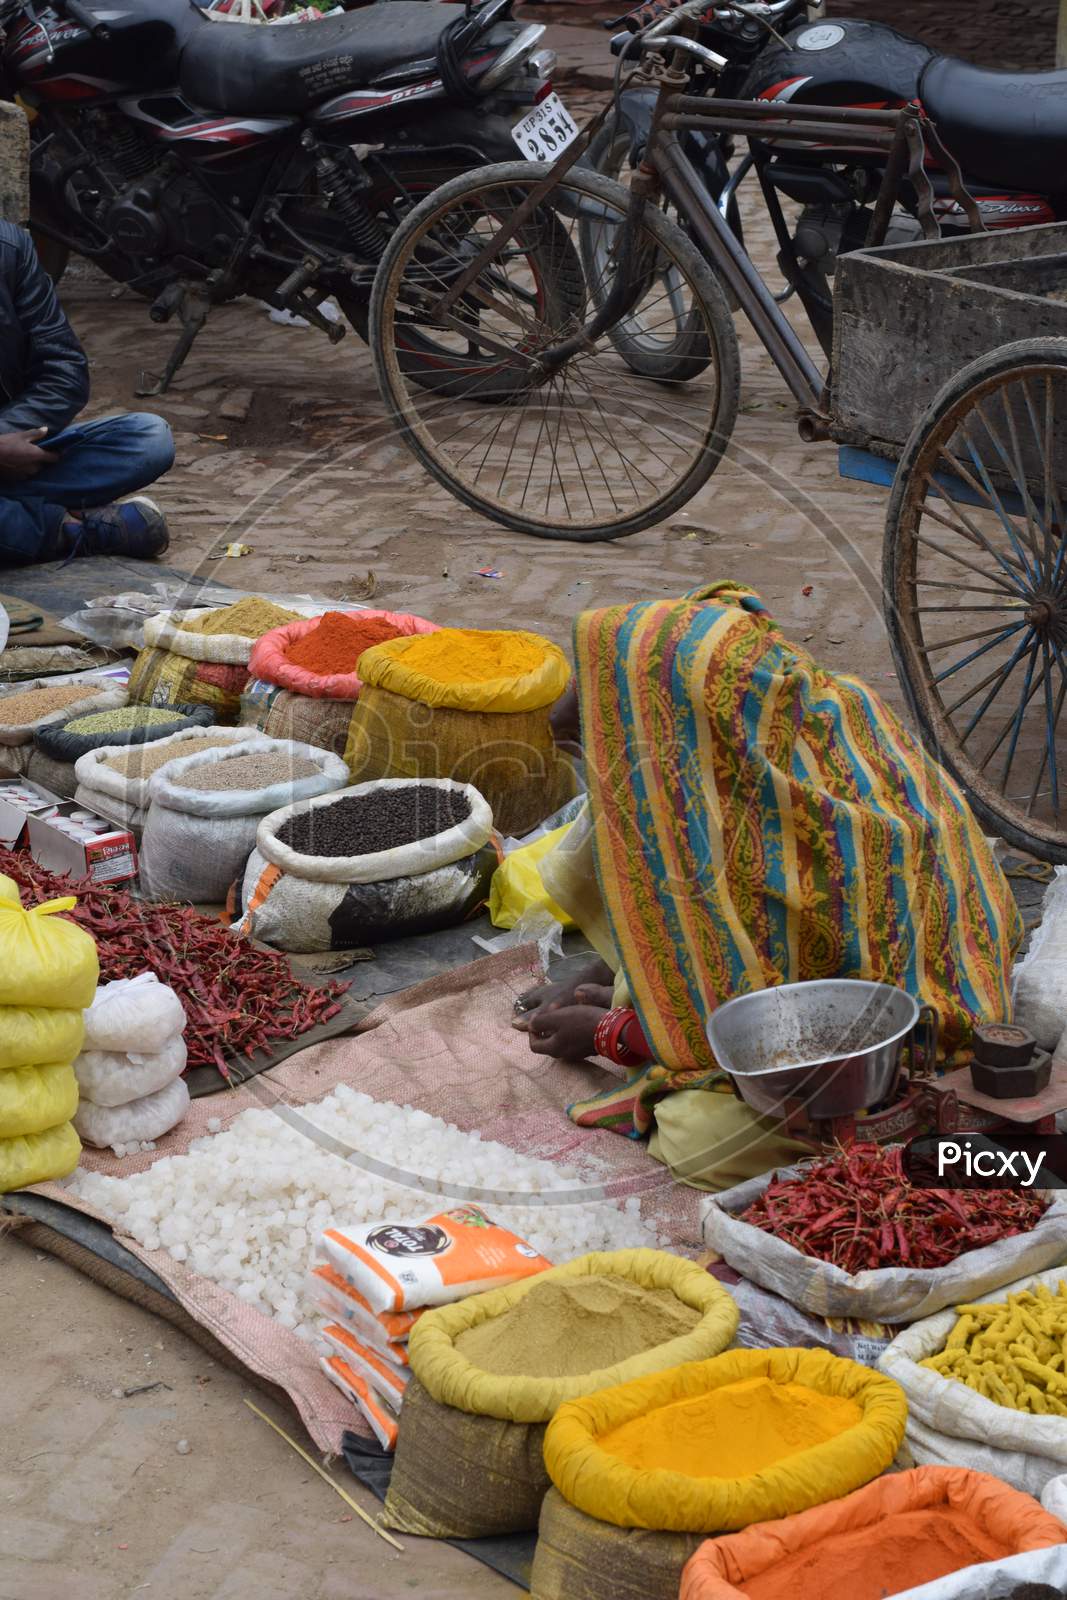 Woman selling spices at market